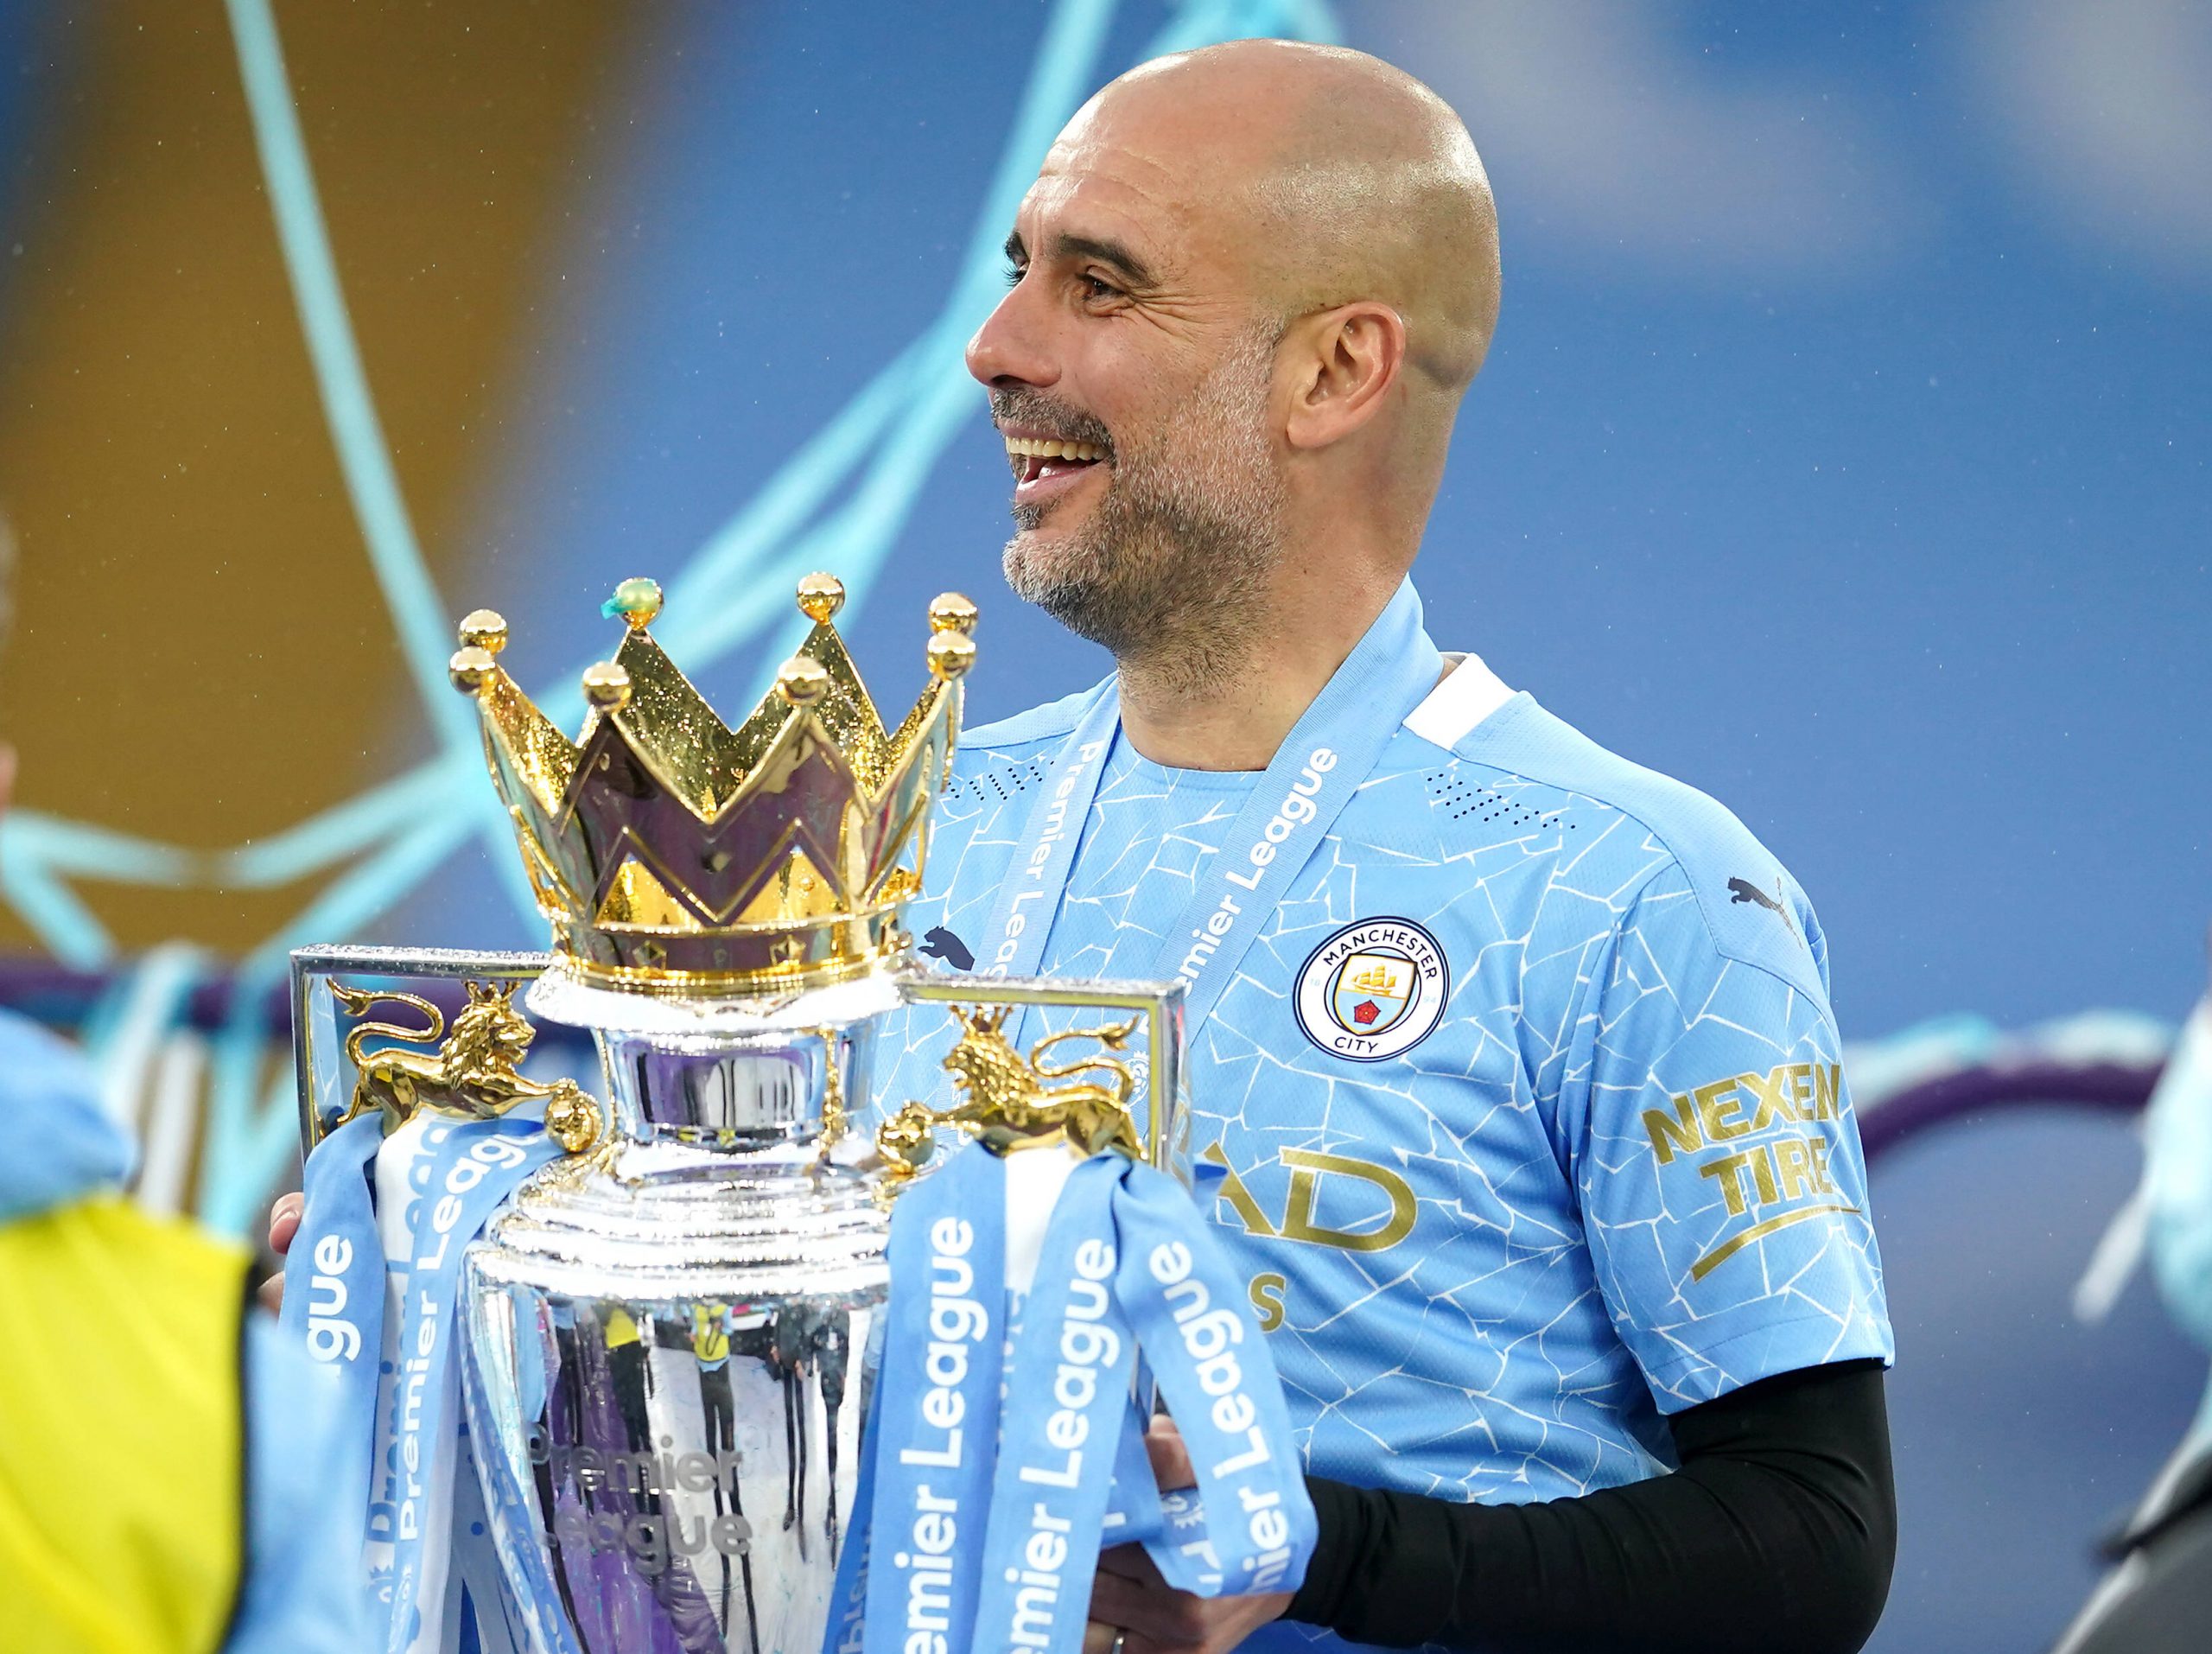 Pep Guardiola says he would be dead if Manchester City spent money like Chelsea.